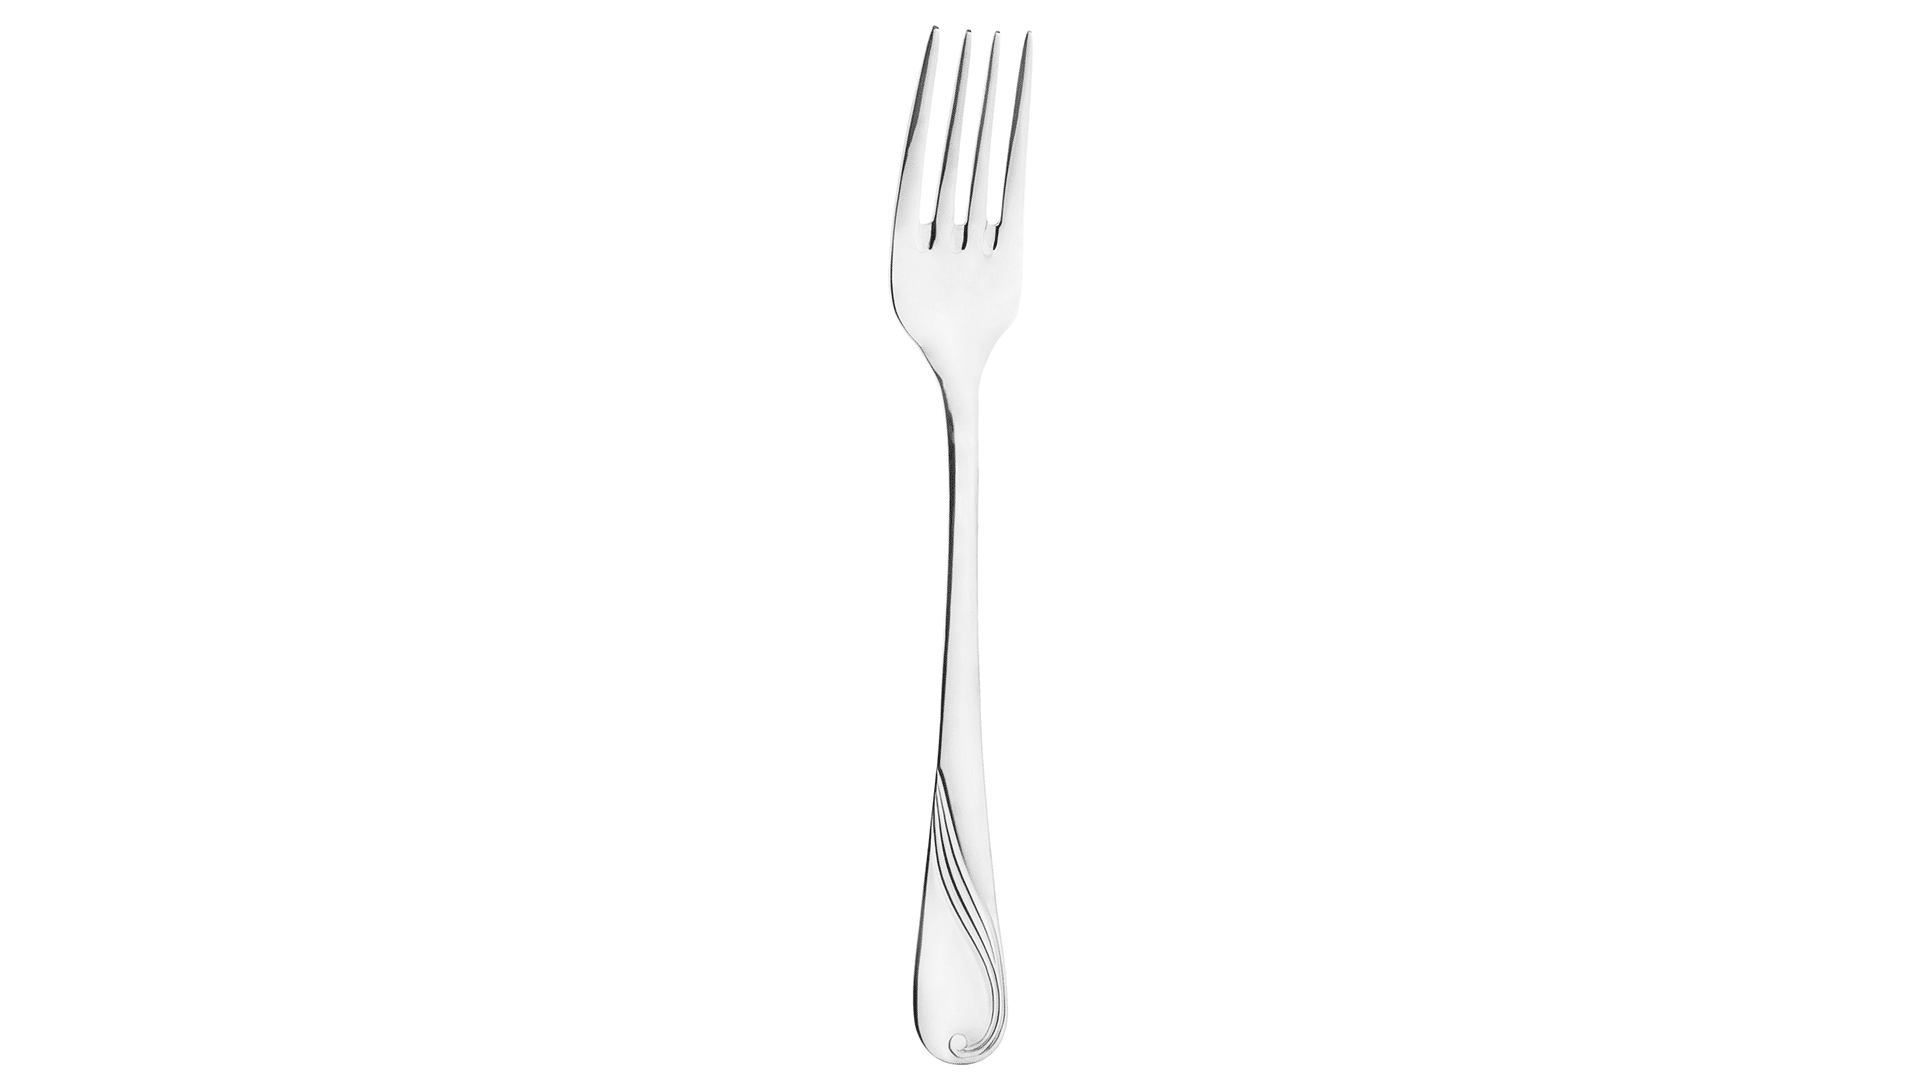 gehring-dinner fork-dinner cutlery-dolce-30-piece-stainless steel handle